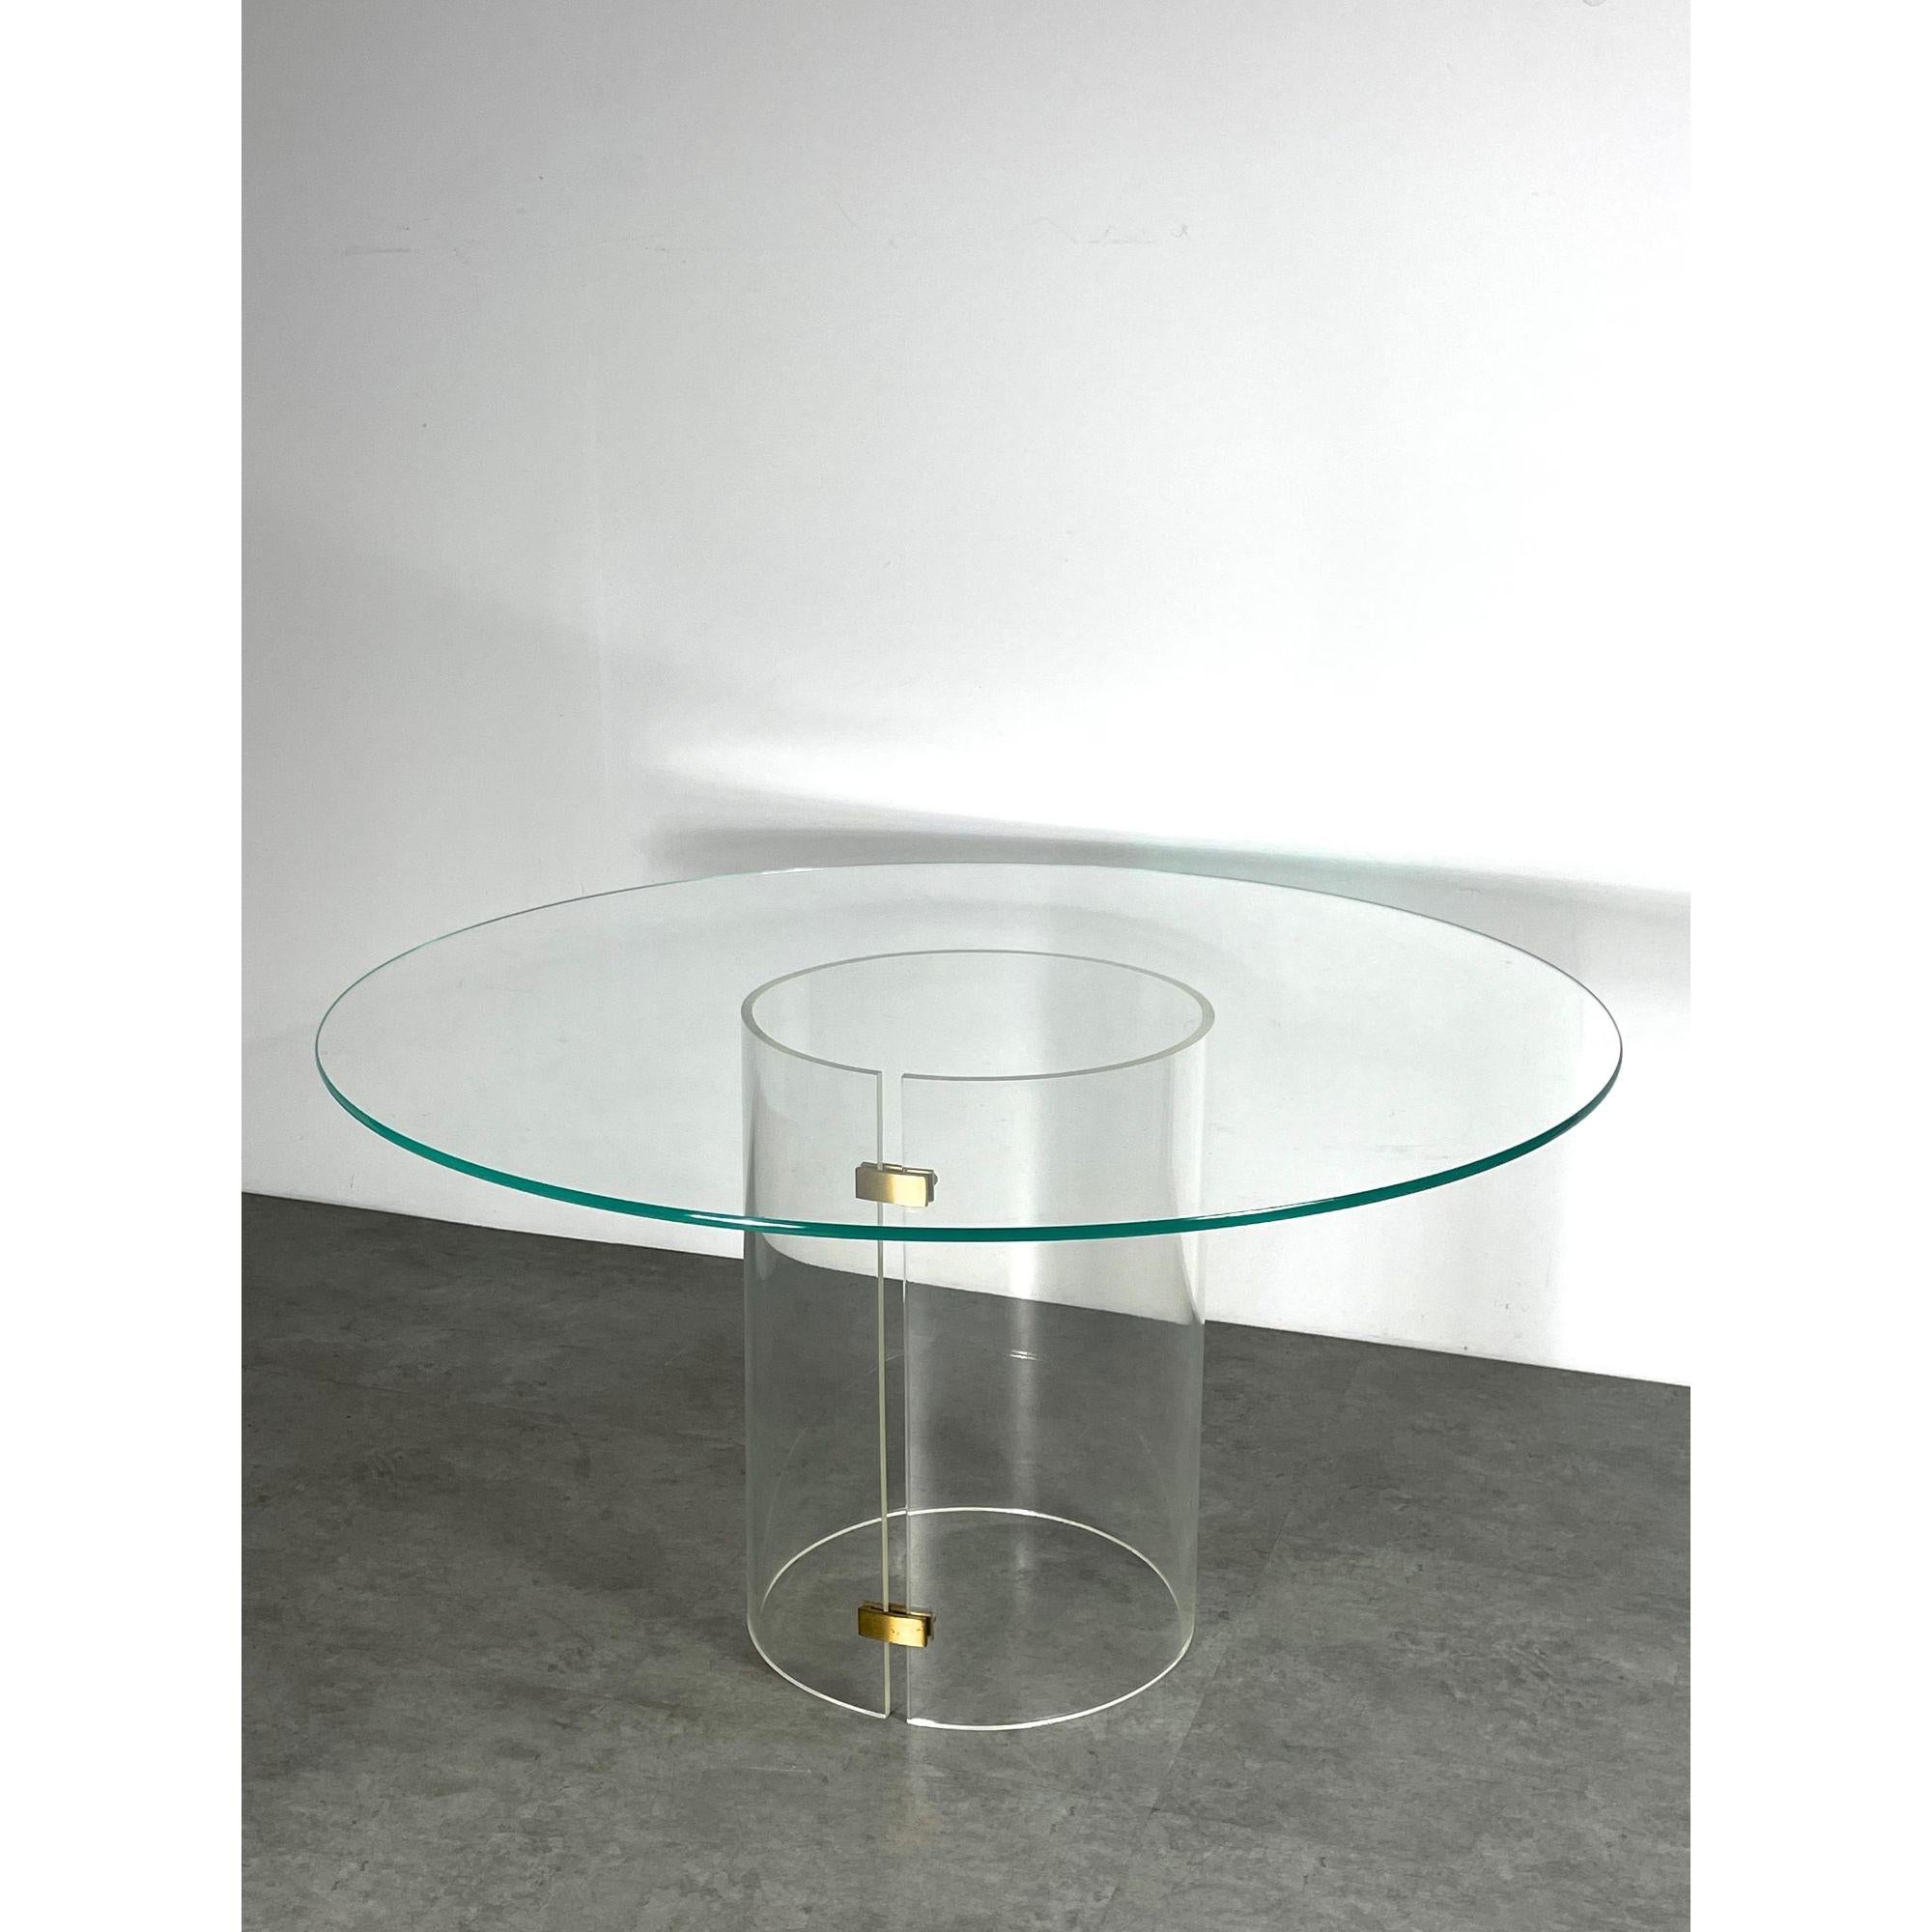 Vintage Round Pedestal Dining Table in Lucite Brass and Glass circa 1970s In Good Condition For Sale In Troy, MI